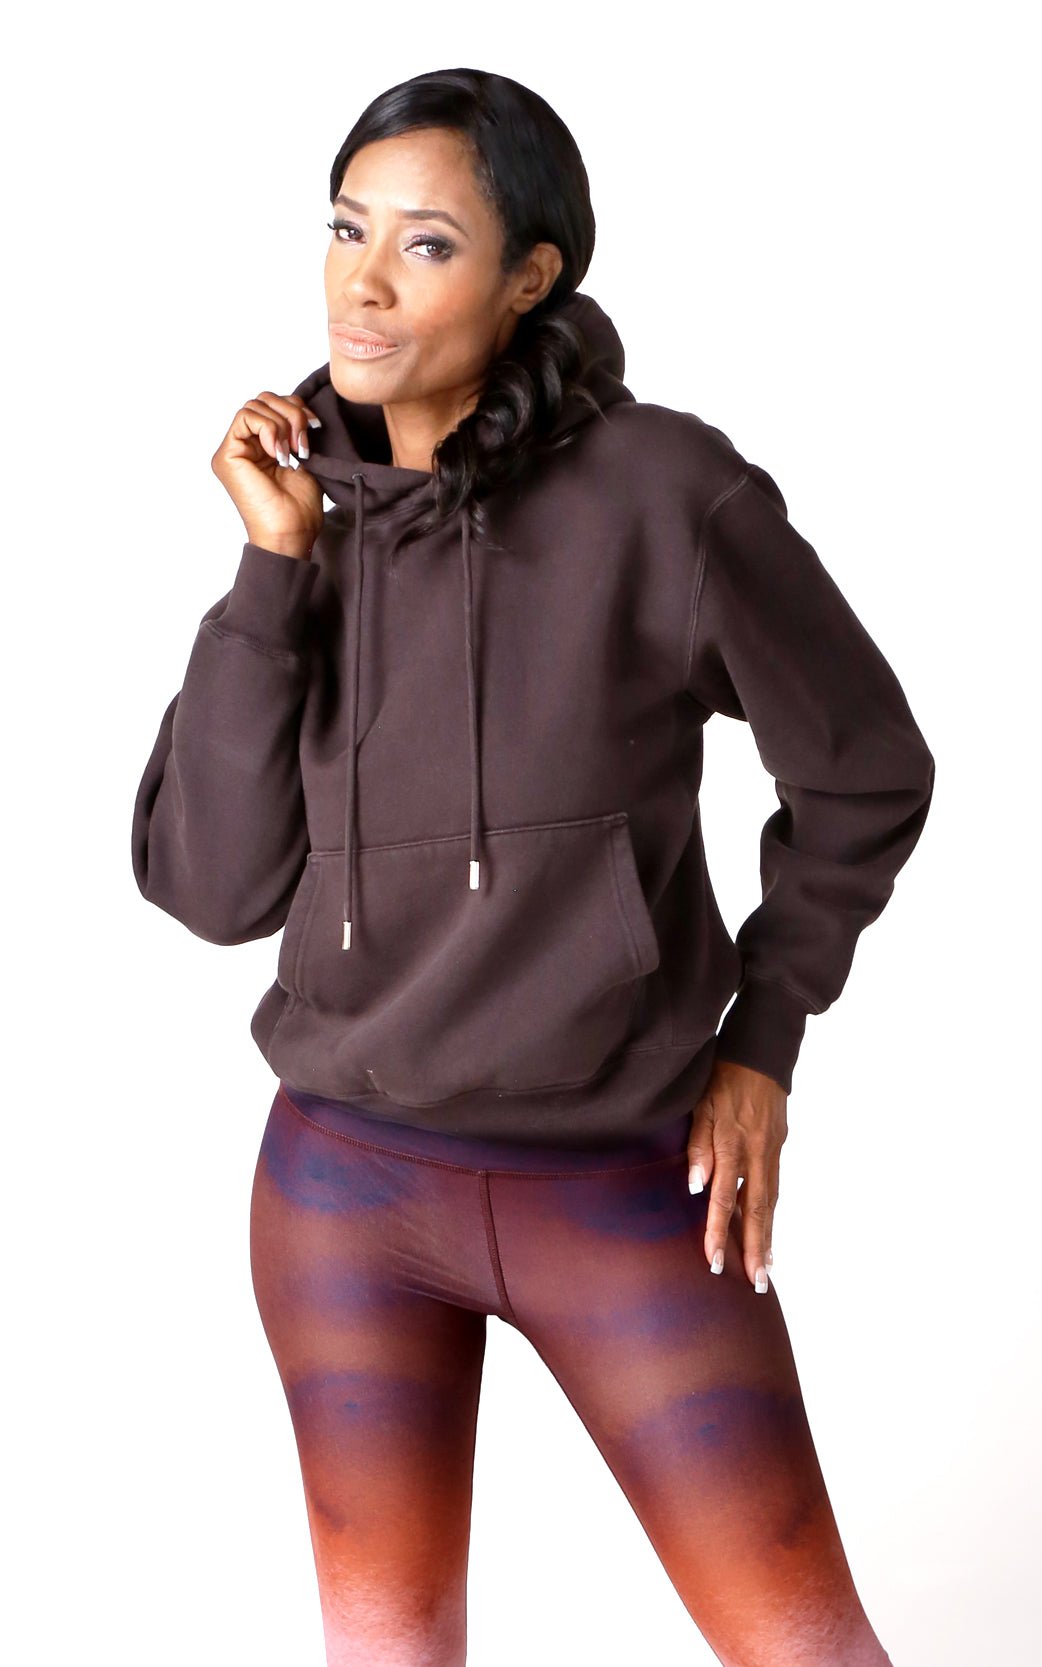 the coziest luxury hoodie sweatshirt in this year's trendiest expresso brown color unisex fit and will last forever